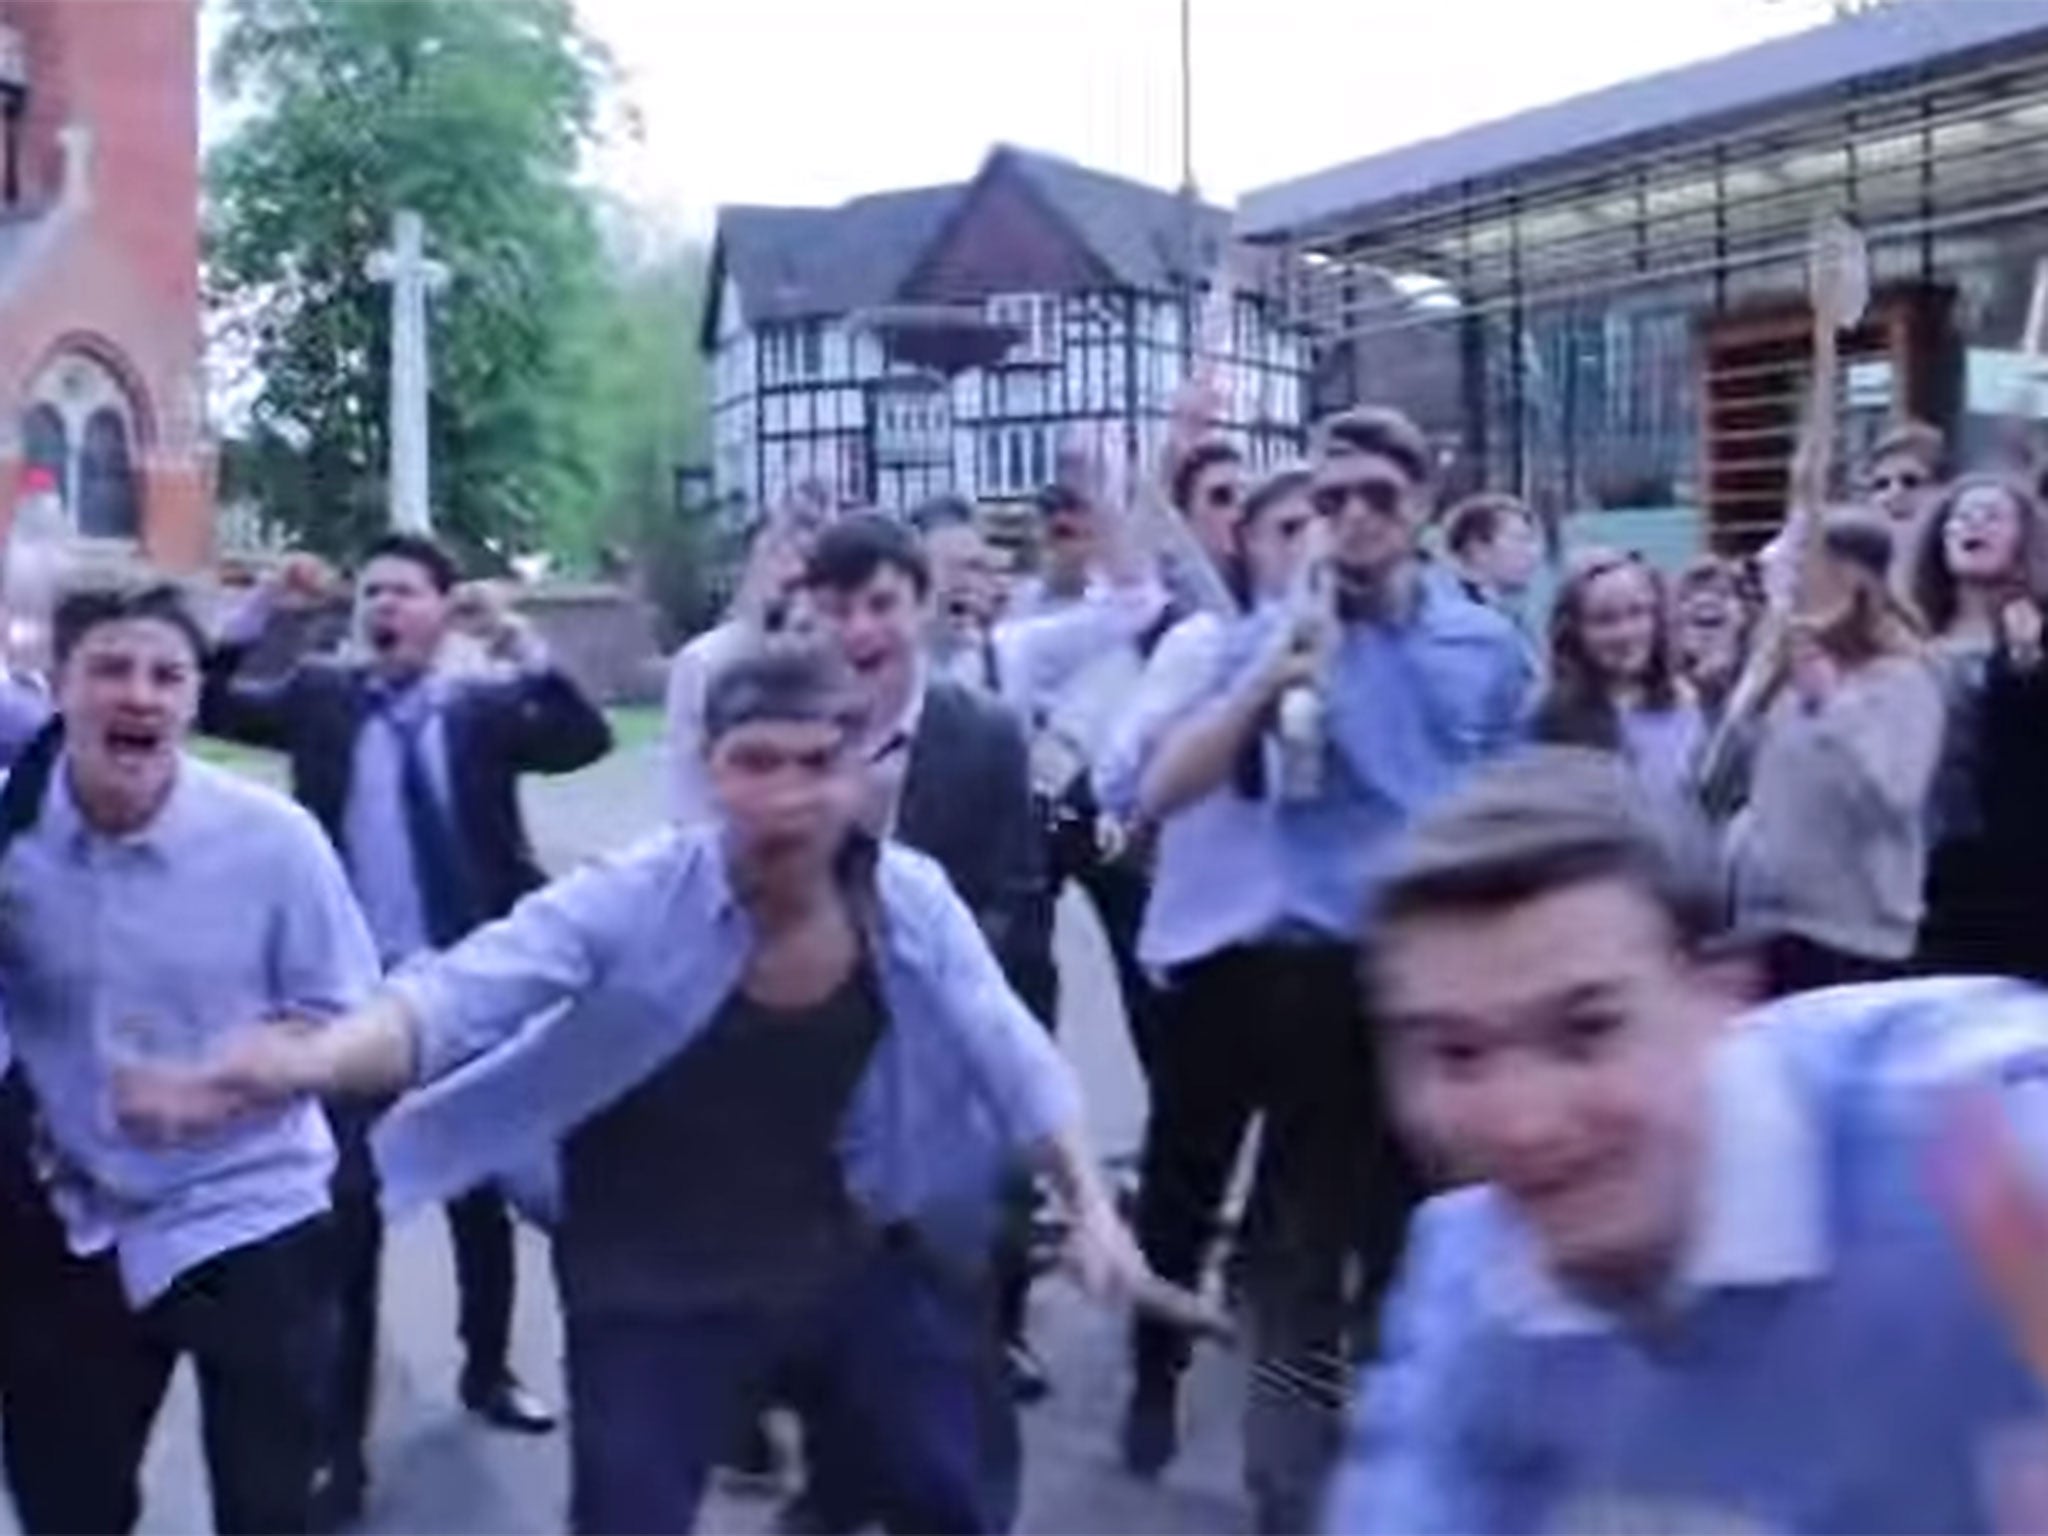 A scene from the video shows students mock rioting